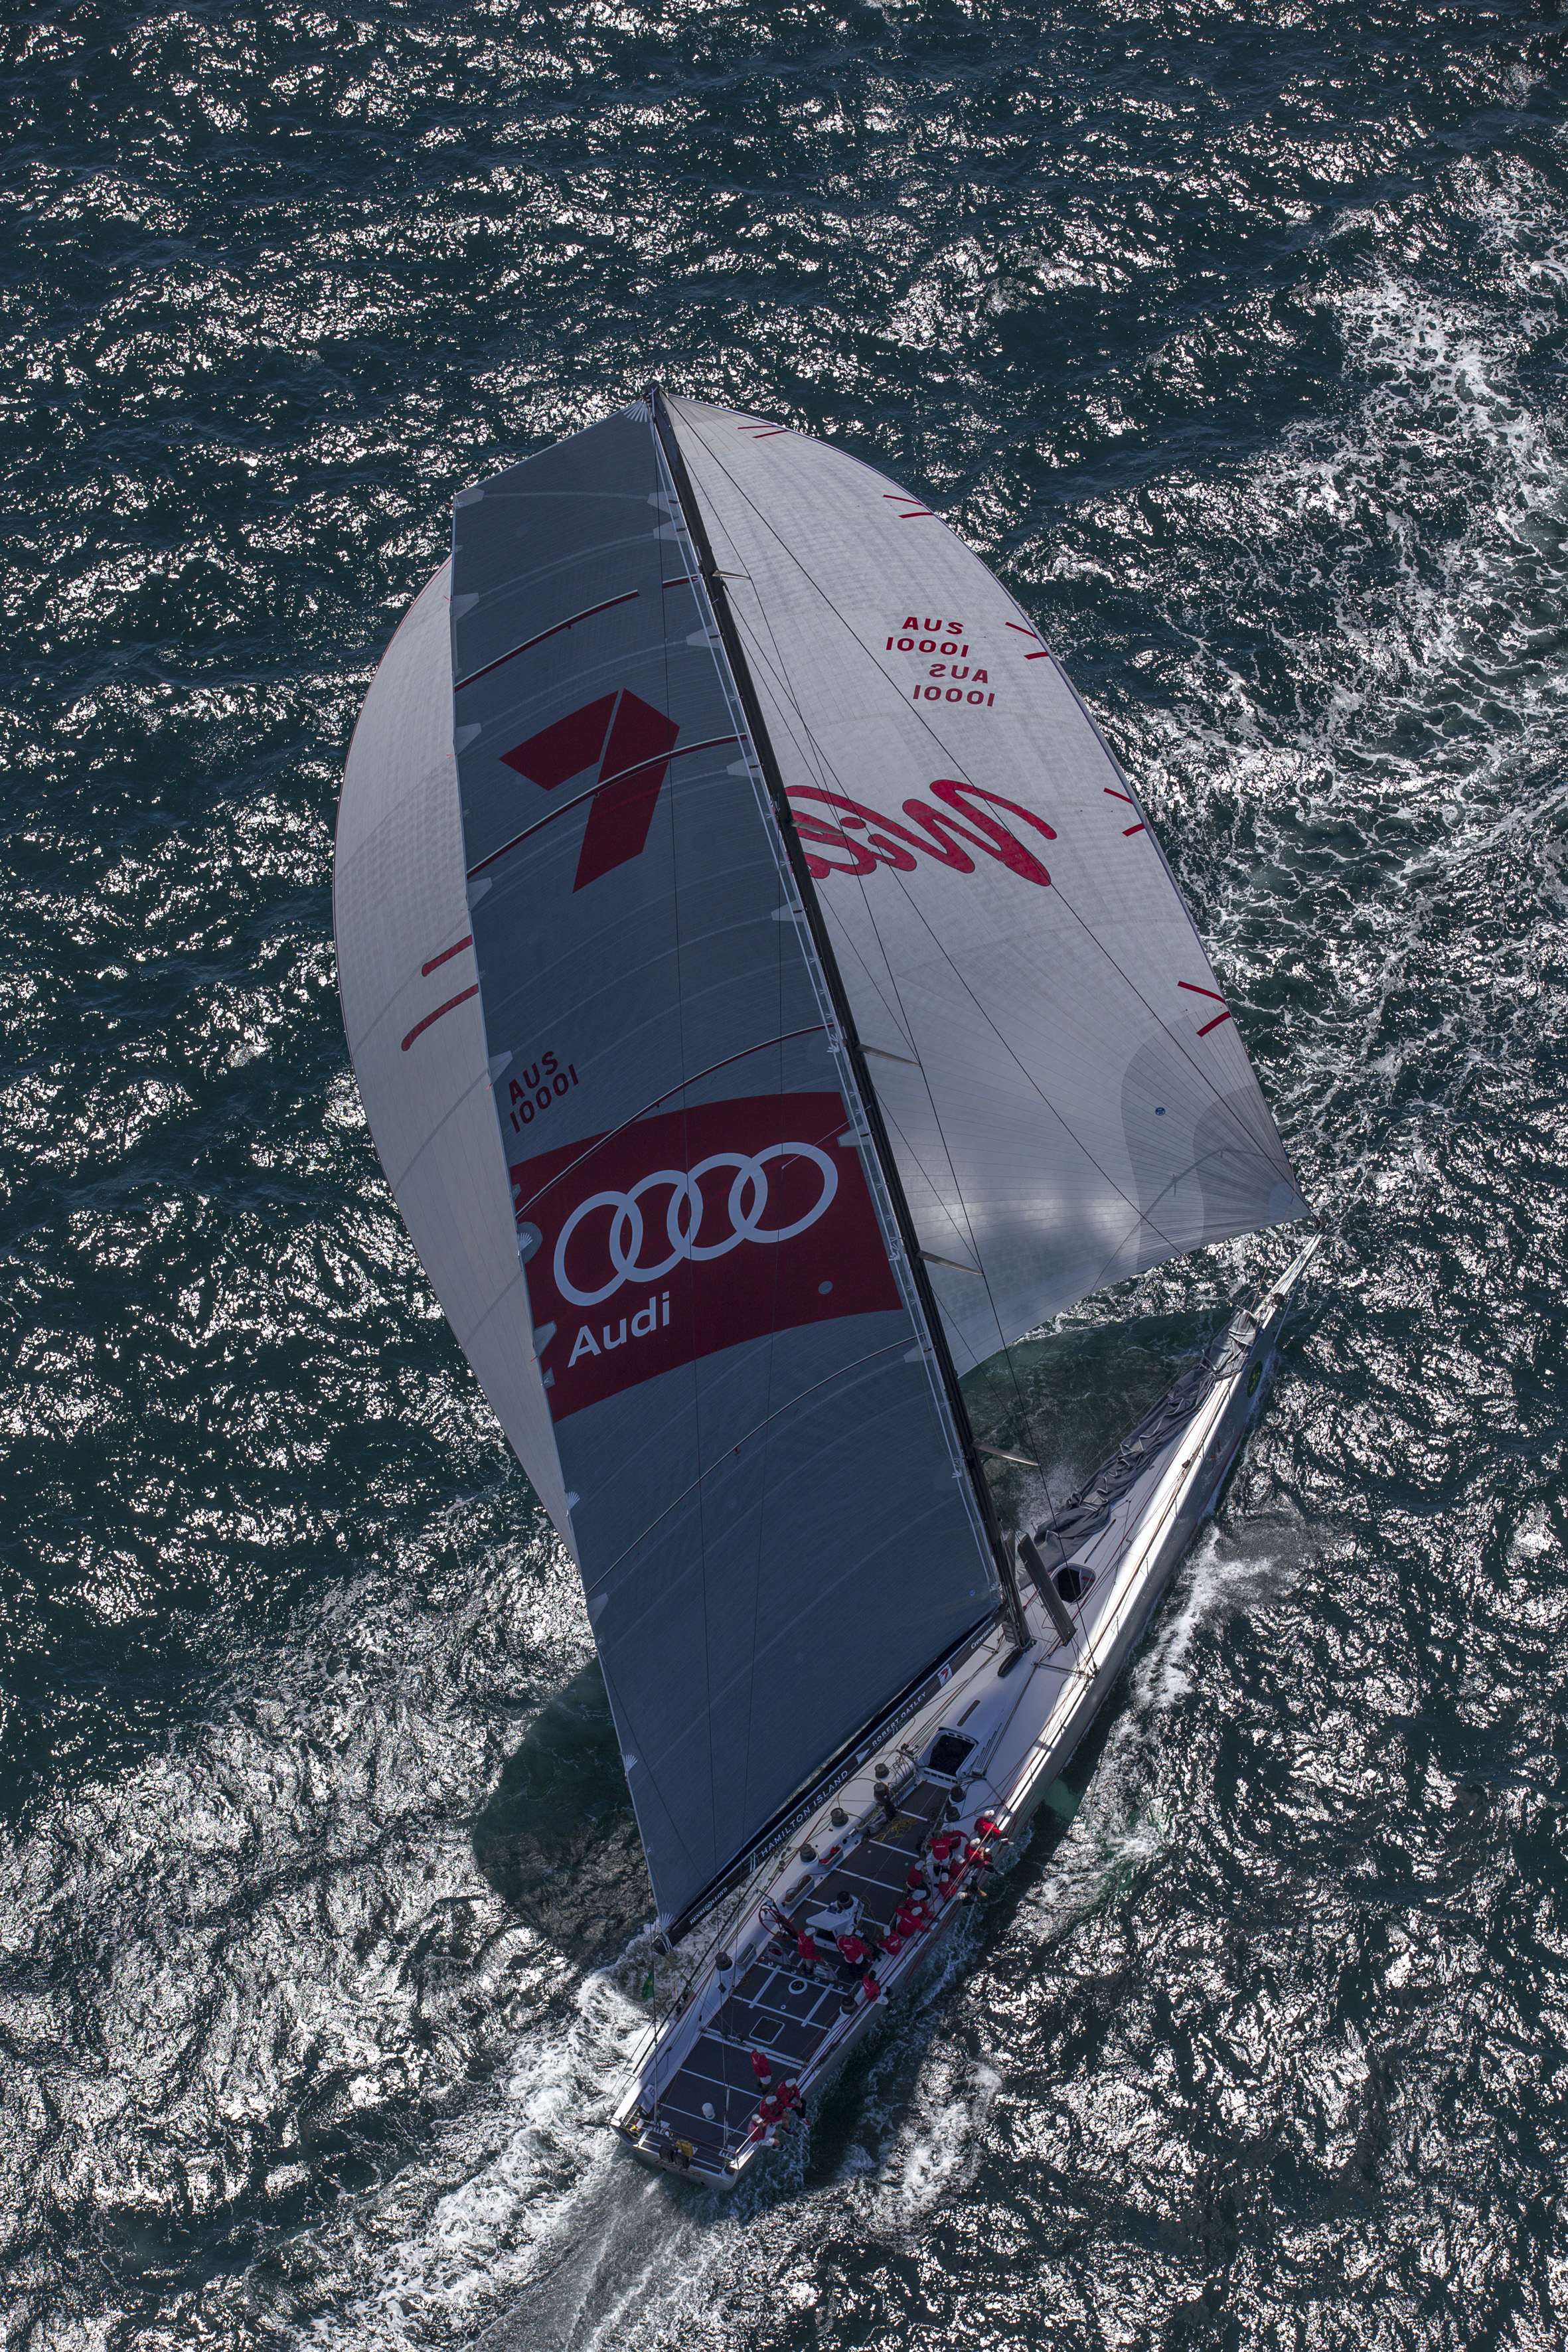 WILD OATS XI ON RECORD PACE IN BRISBANE TO KEPPEL YACHT RACE